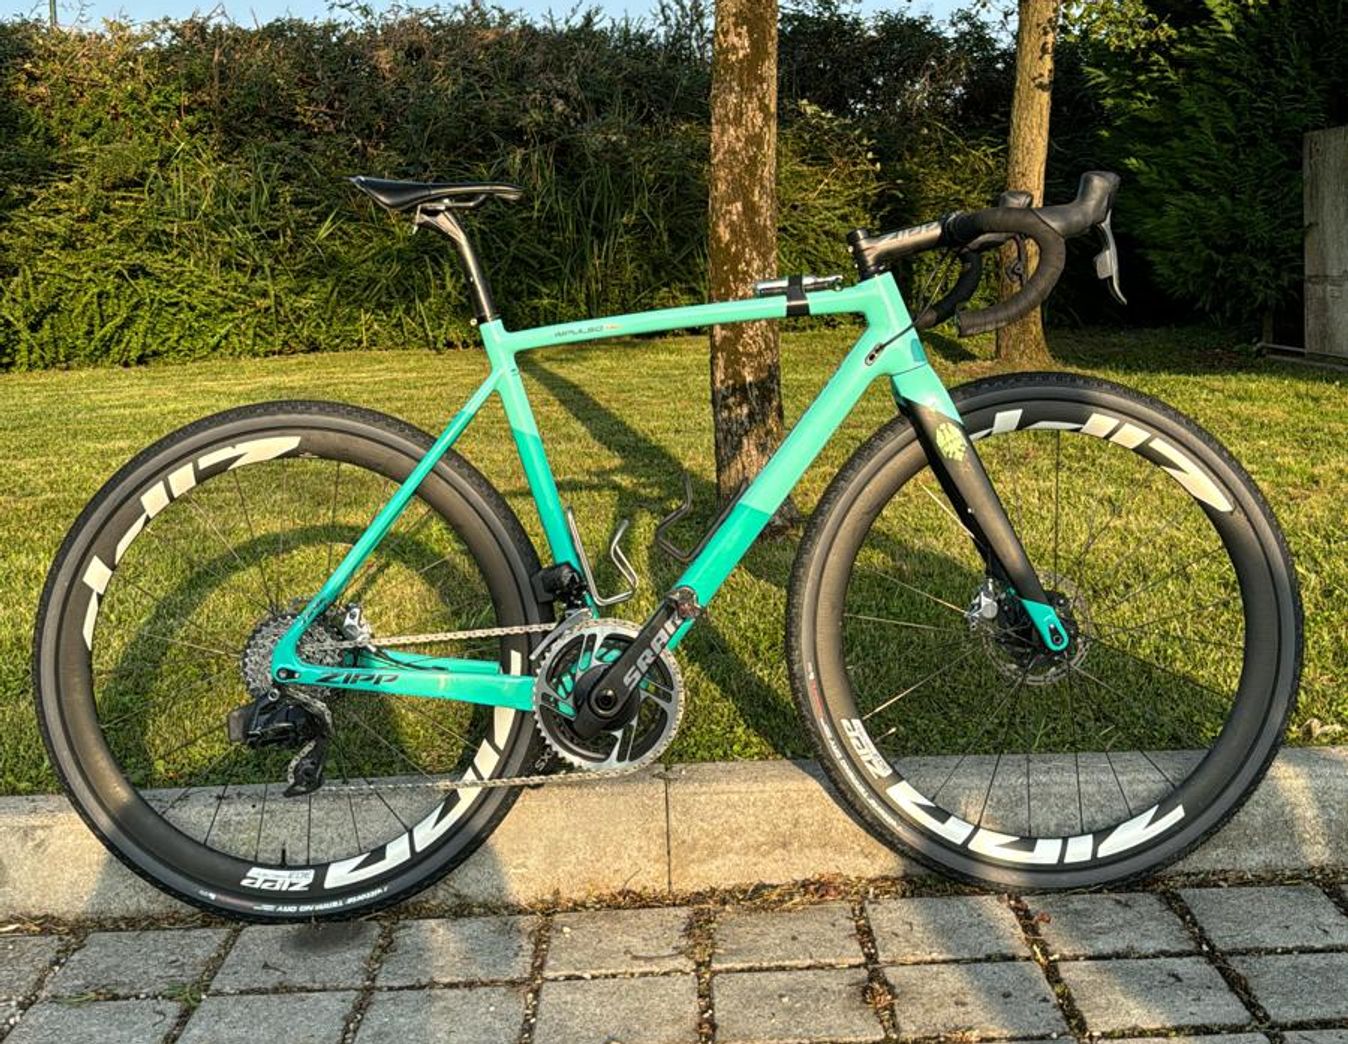 The Impulso is the race-focused offering from Bianchi